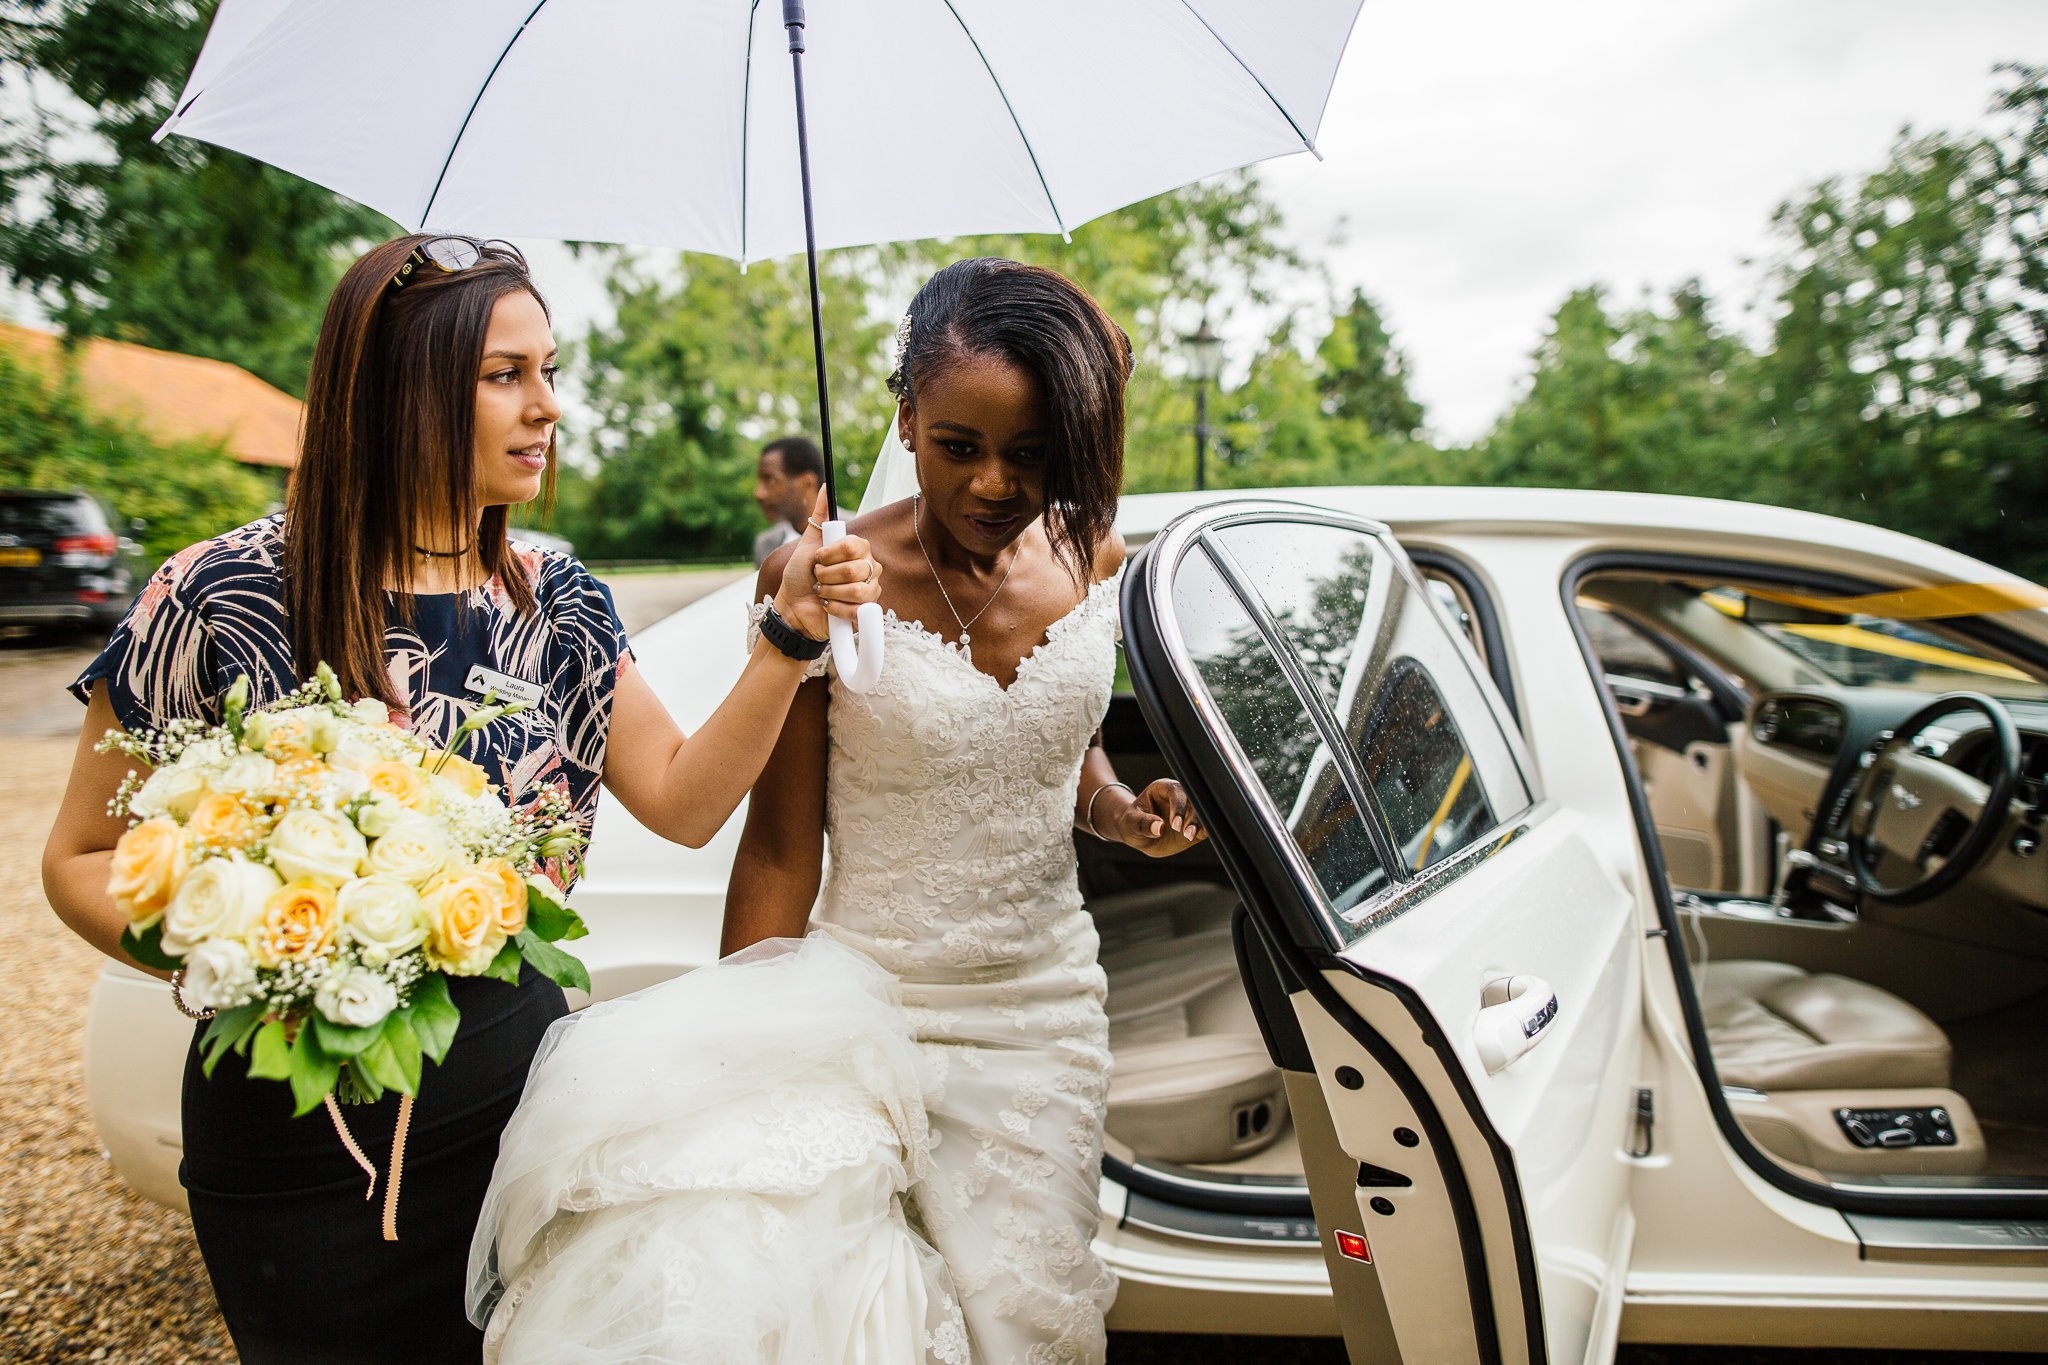  Bride getting out of car under an umbrella at Newland Hall Essex 